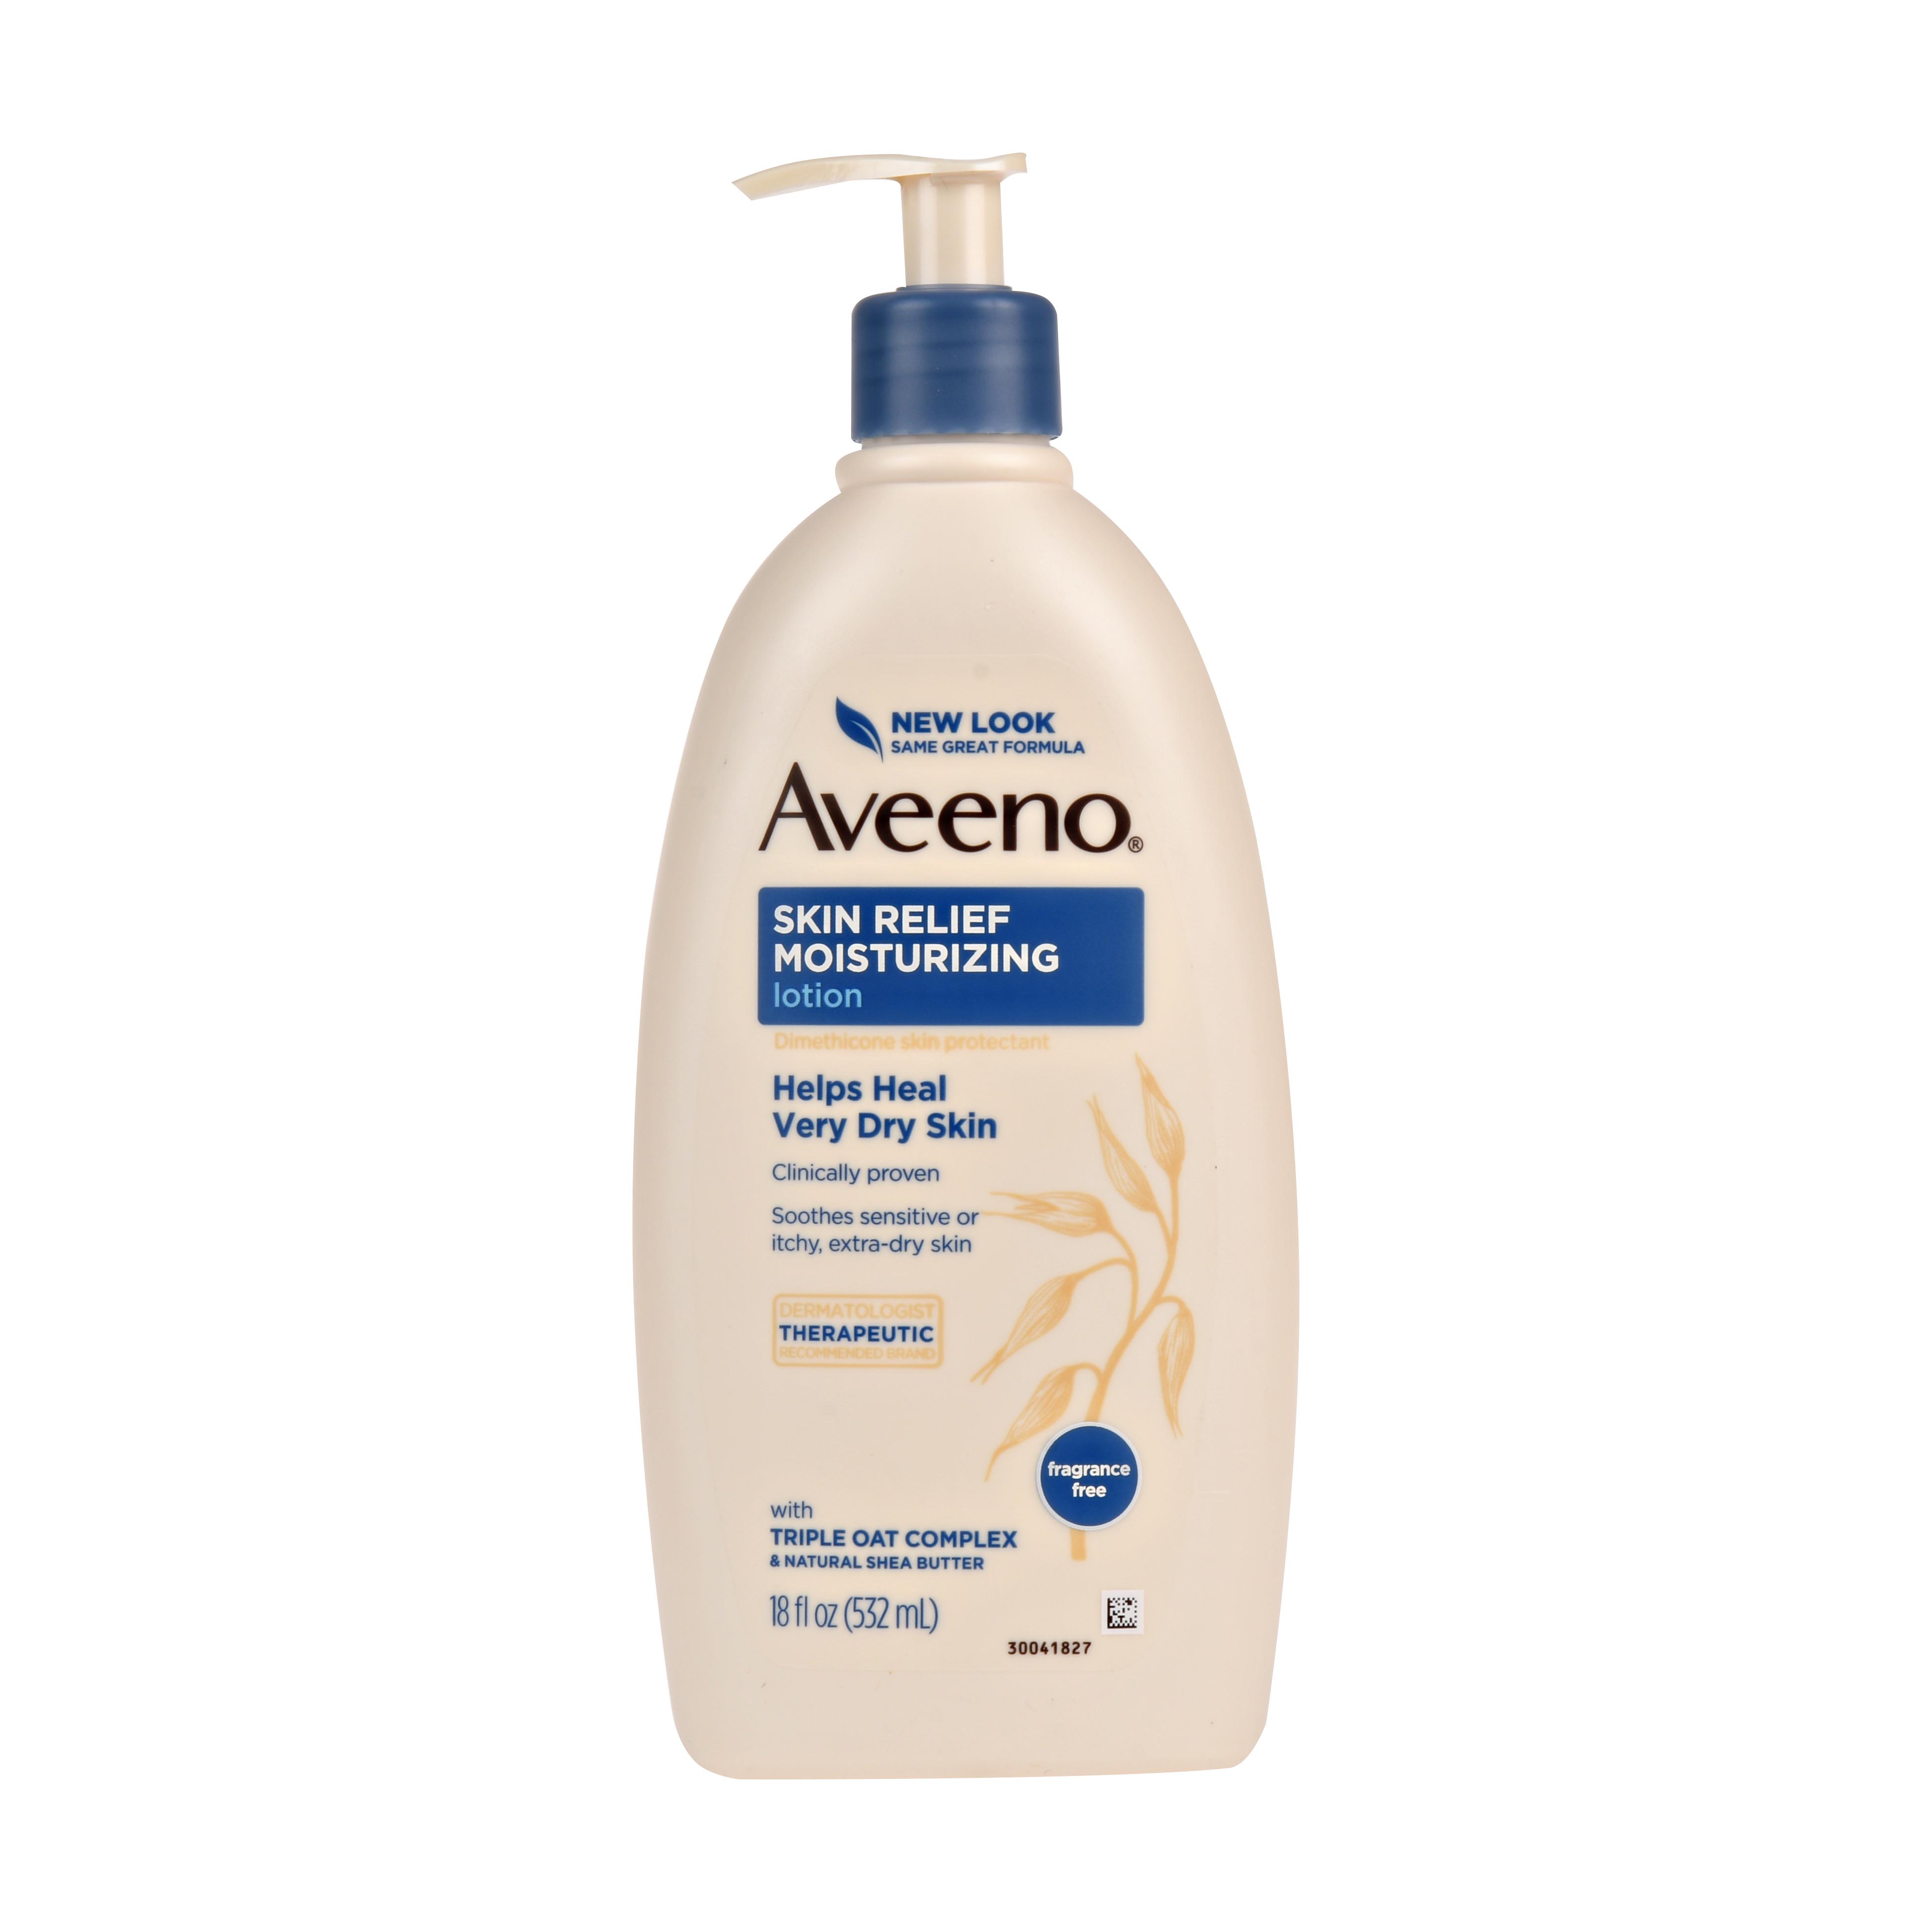 Aveeno Skin Relief Moisturizing Body and Hand Lotion for Dry Skin, Fragrance Free, 18 oz - image 1 of 13